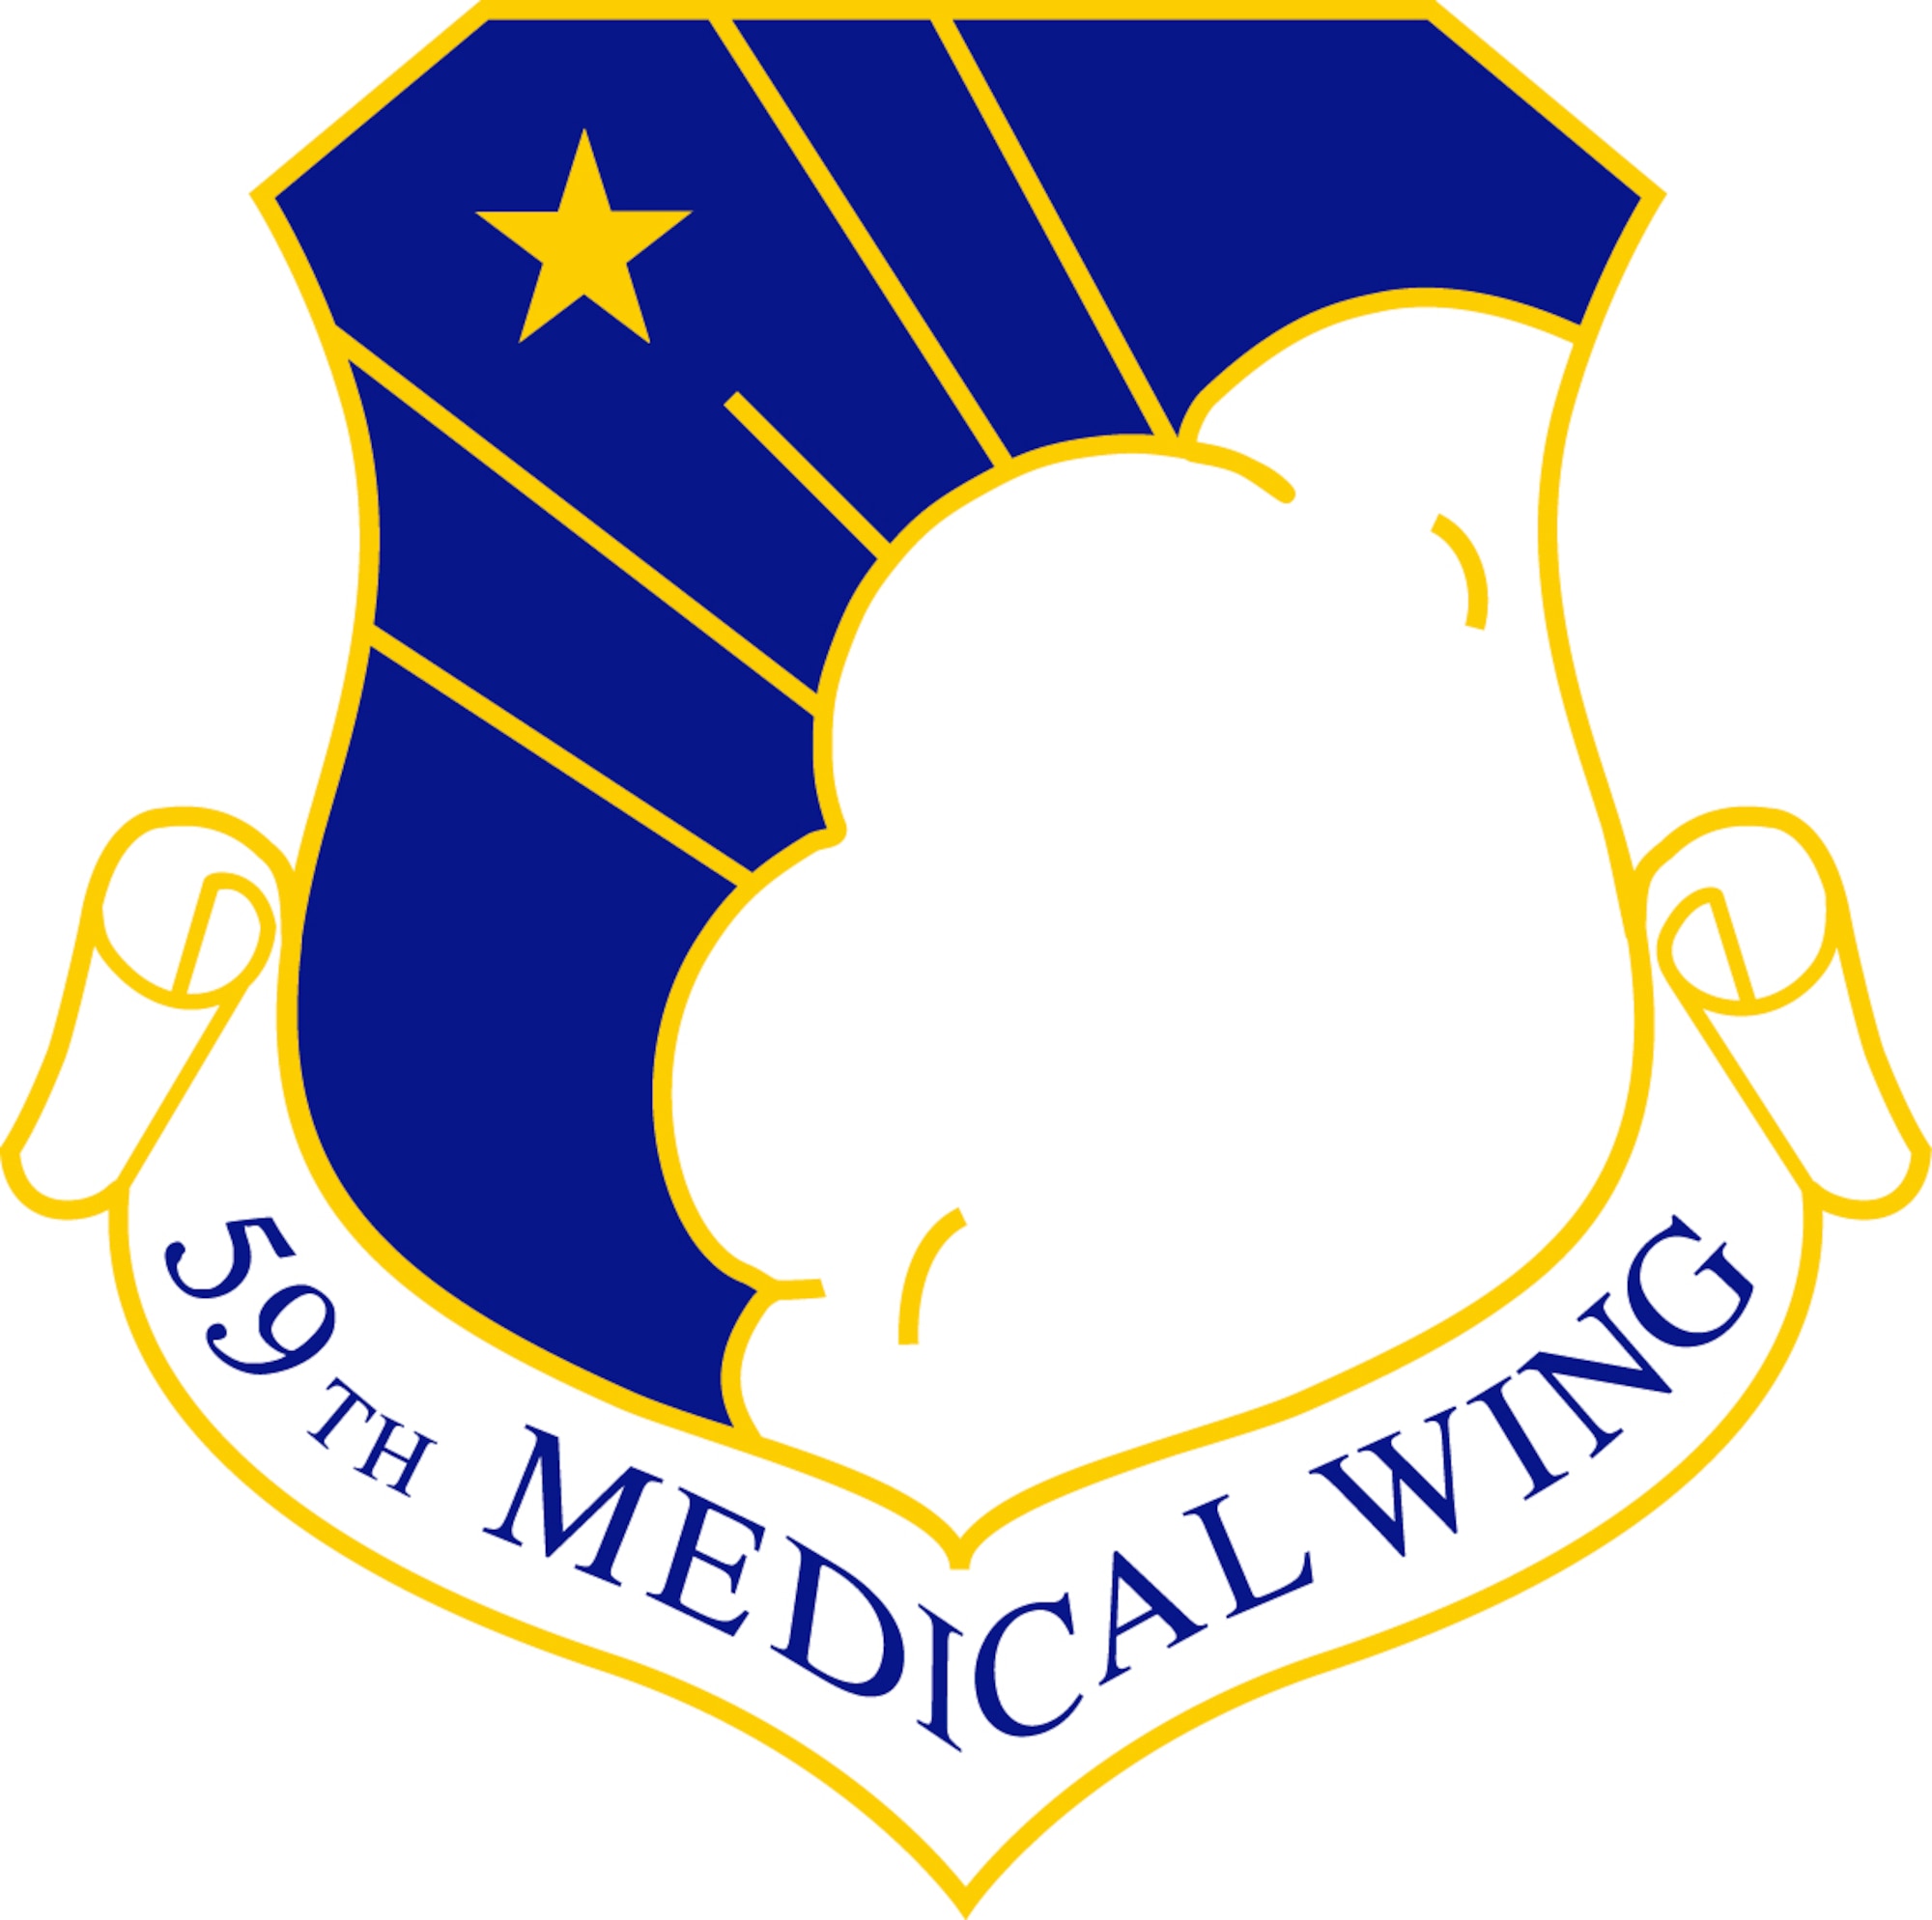 The 59th Medical Wing, located at Joint Base San Antonio-Lackland, is the Air Force's premier healthcare, medical education and research, and readiness wing. The wing's vision is "Exemplary Care, Global Response." Its mission is "Developing Warrior Medics Through Patient-Centered Care." (U.S. graphic by Robert Shelly)